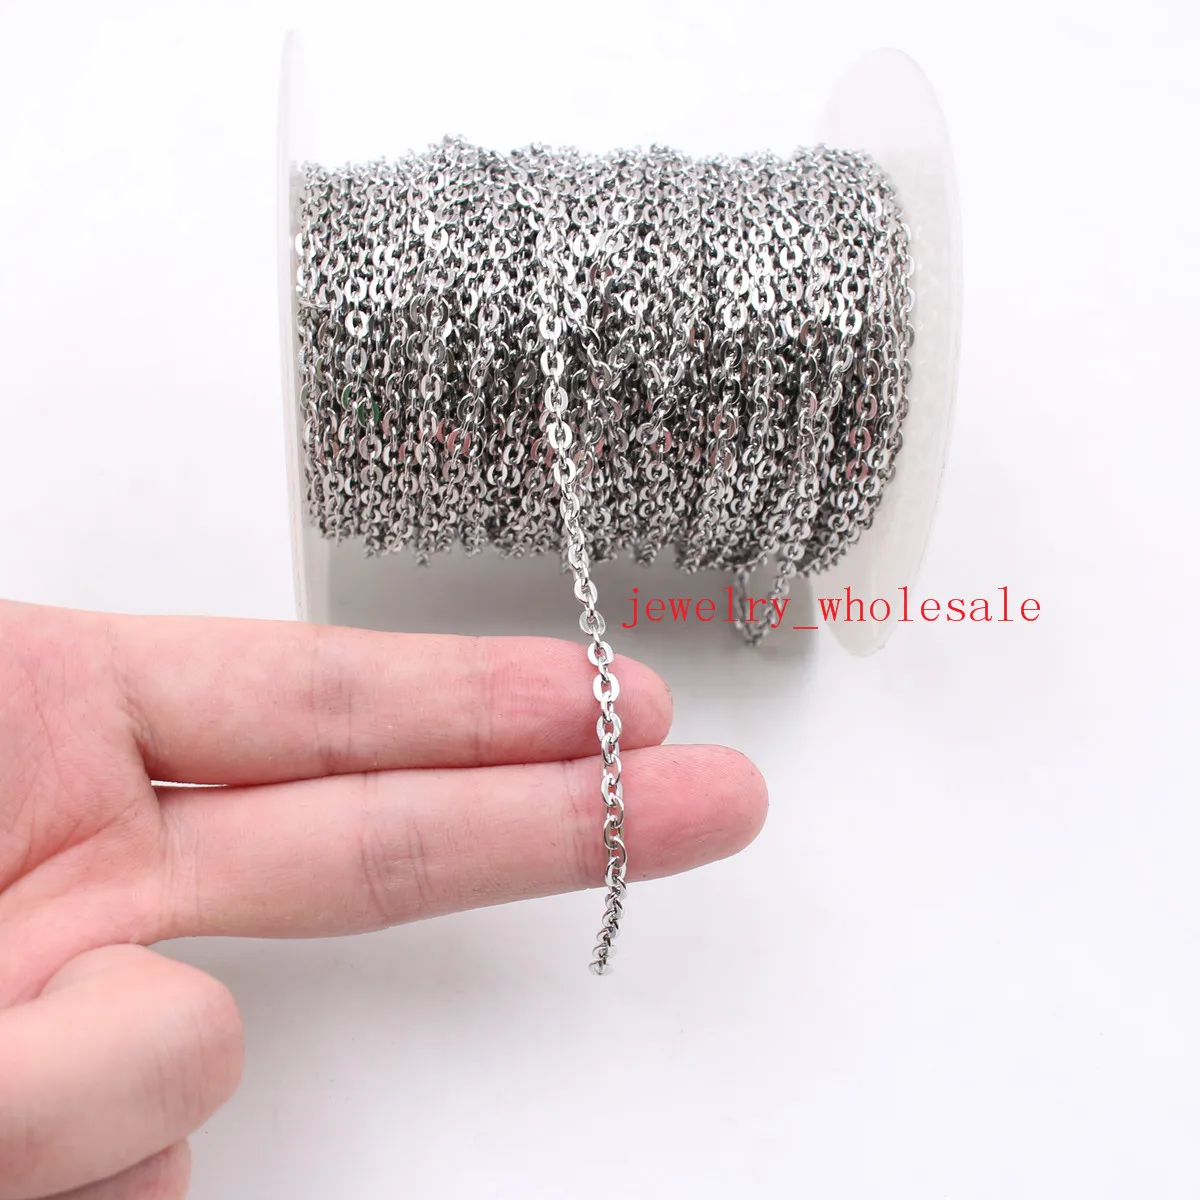 50meter/ Roll Large wholesale in bulk Jewelry Finding Chain silver Stainless Steel strong Flat Oval Rolo Cross Chain FIT pendant DIY